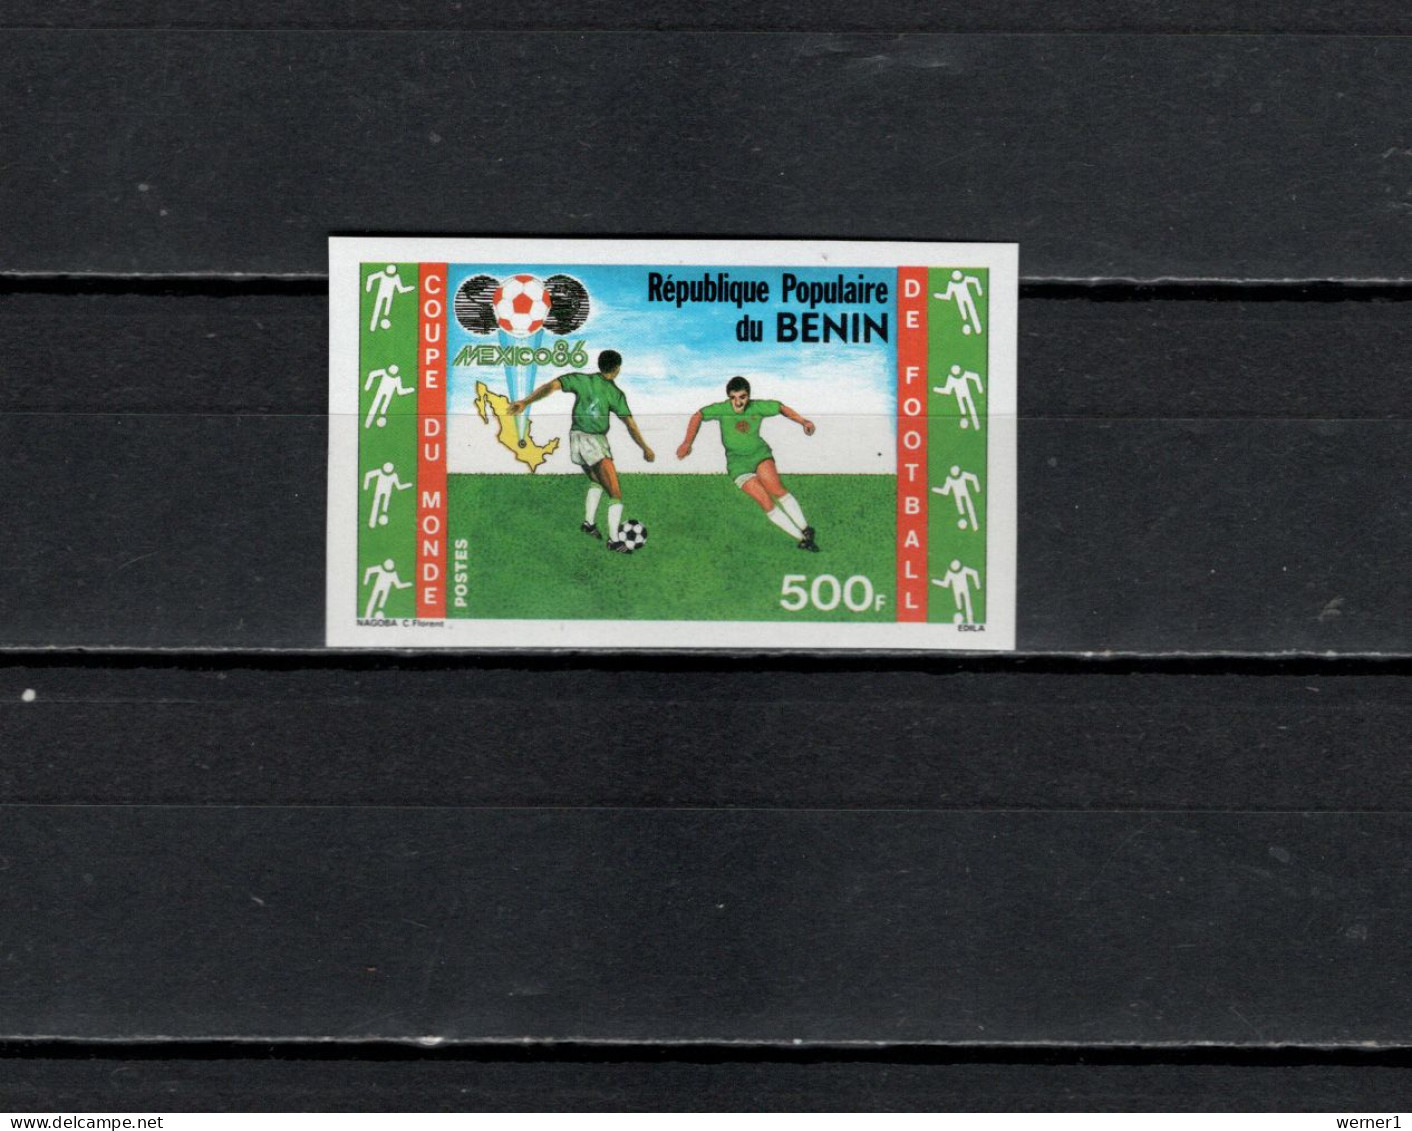 Benin 1986 Football Soccer World Cup Stamp Imperf. MNH -scarce- - 1986 – Mexiko